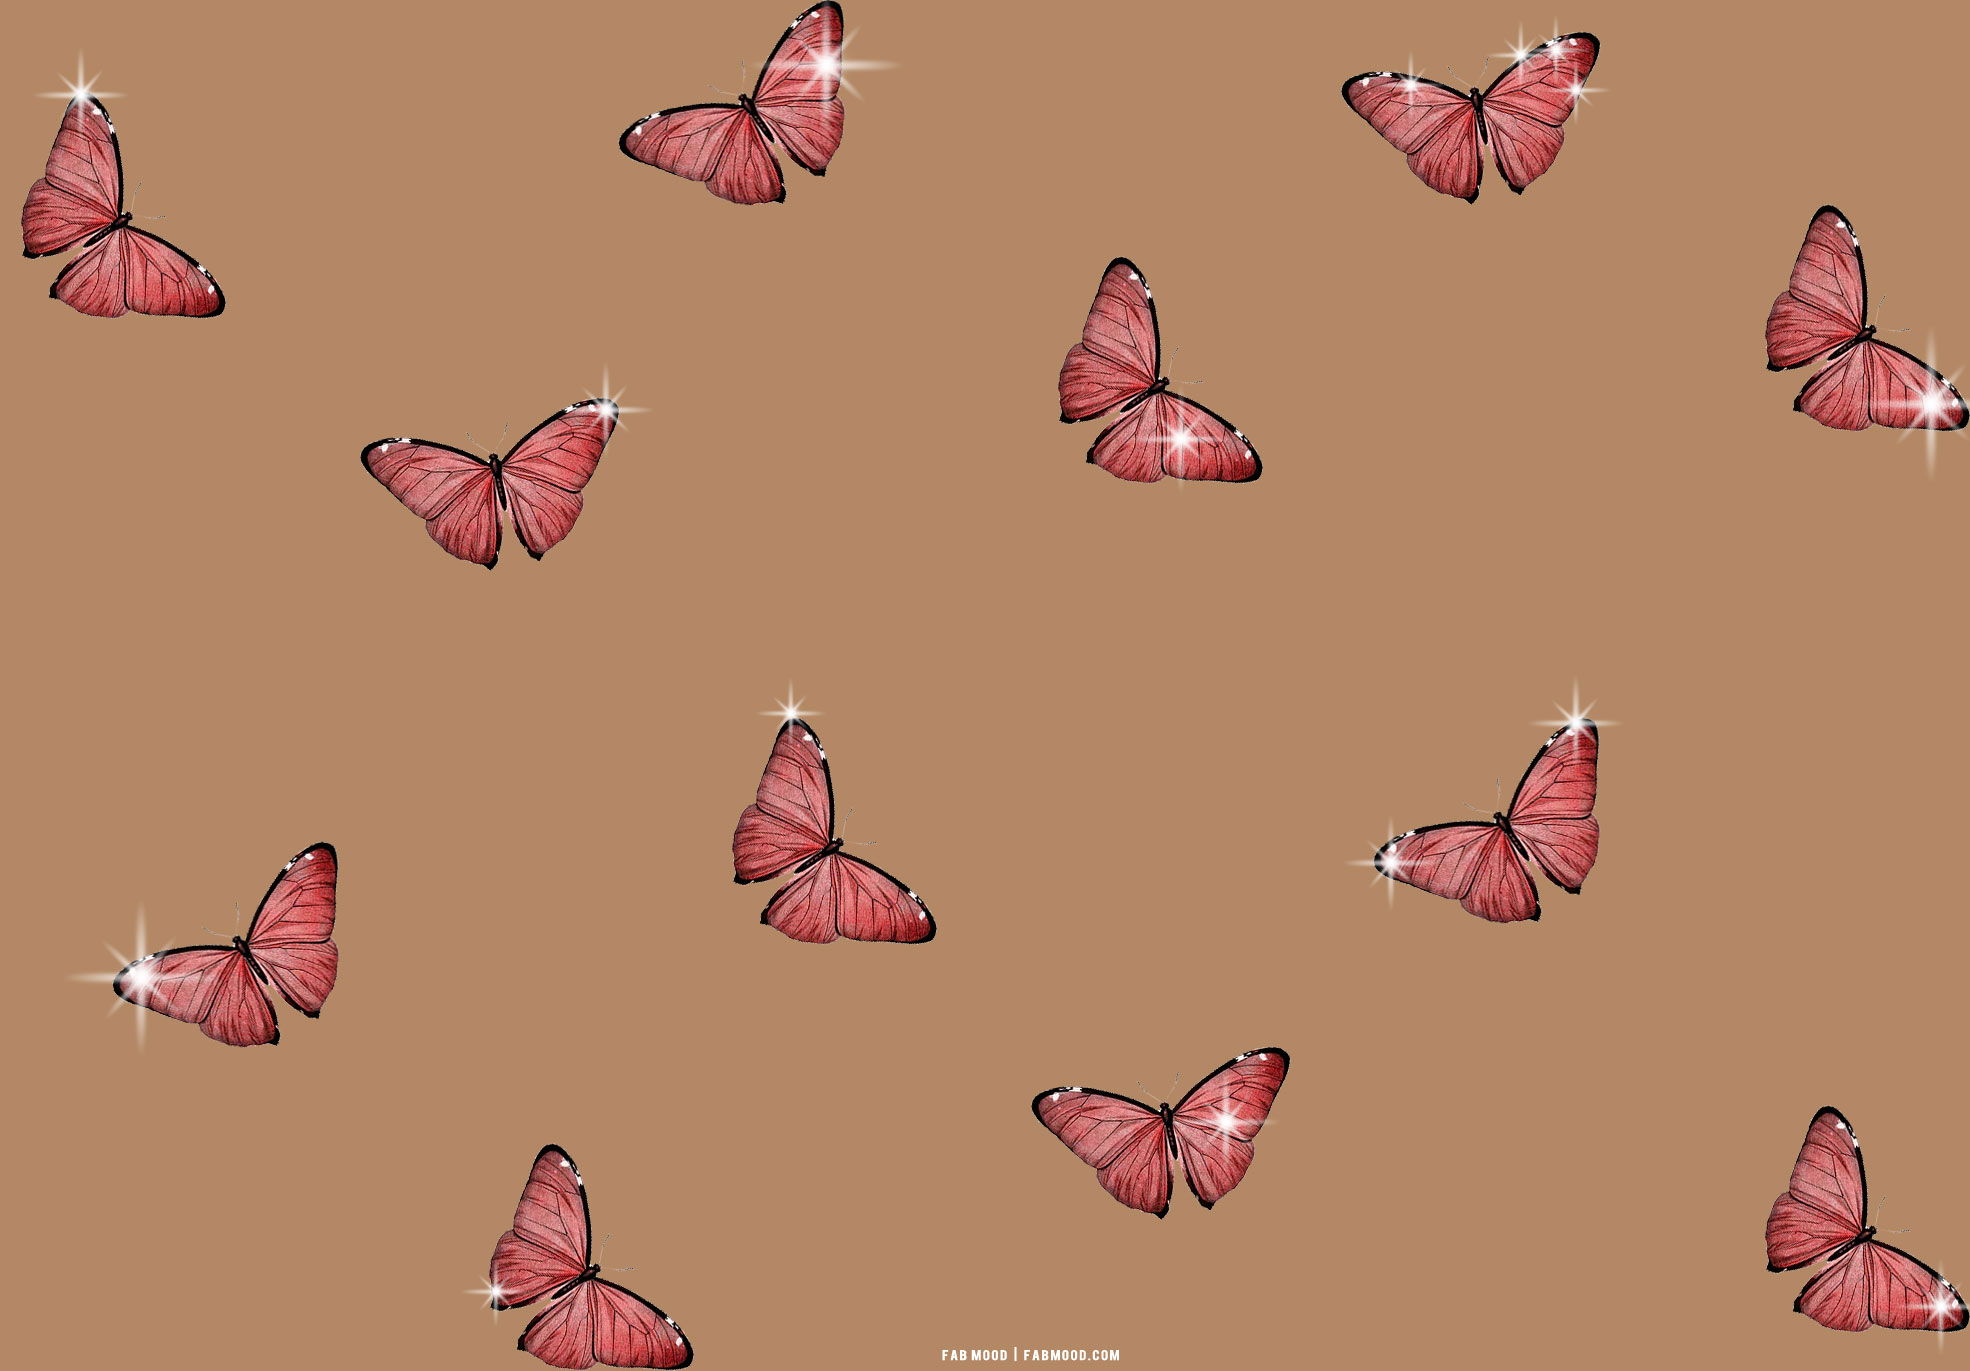 25 Brown Aesthetic Wallpaper for Laptop : Sparkle Butterfly Aesthetic Background